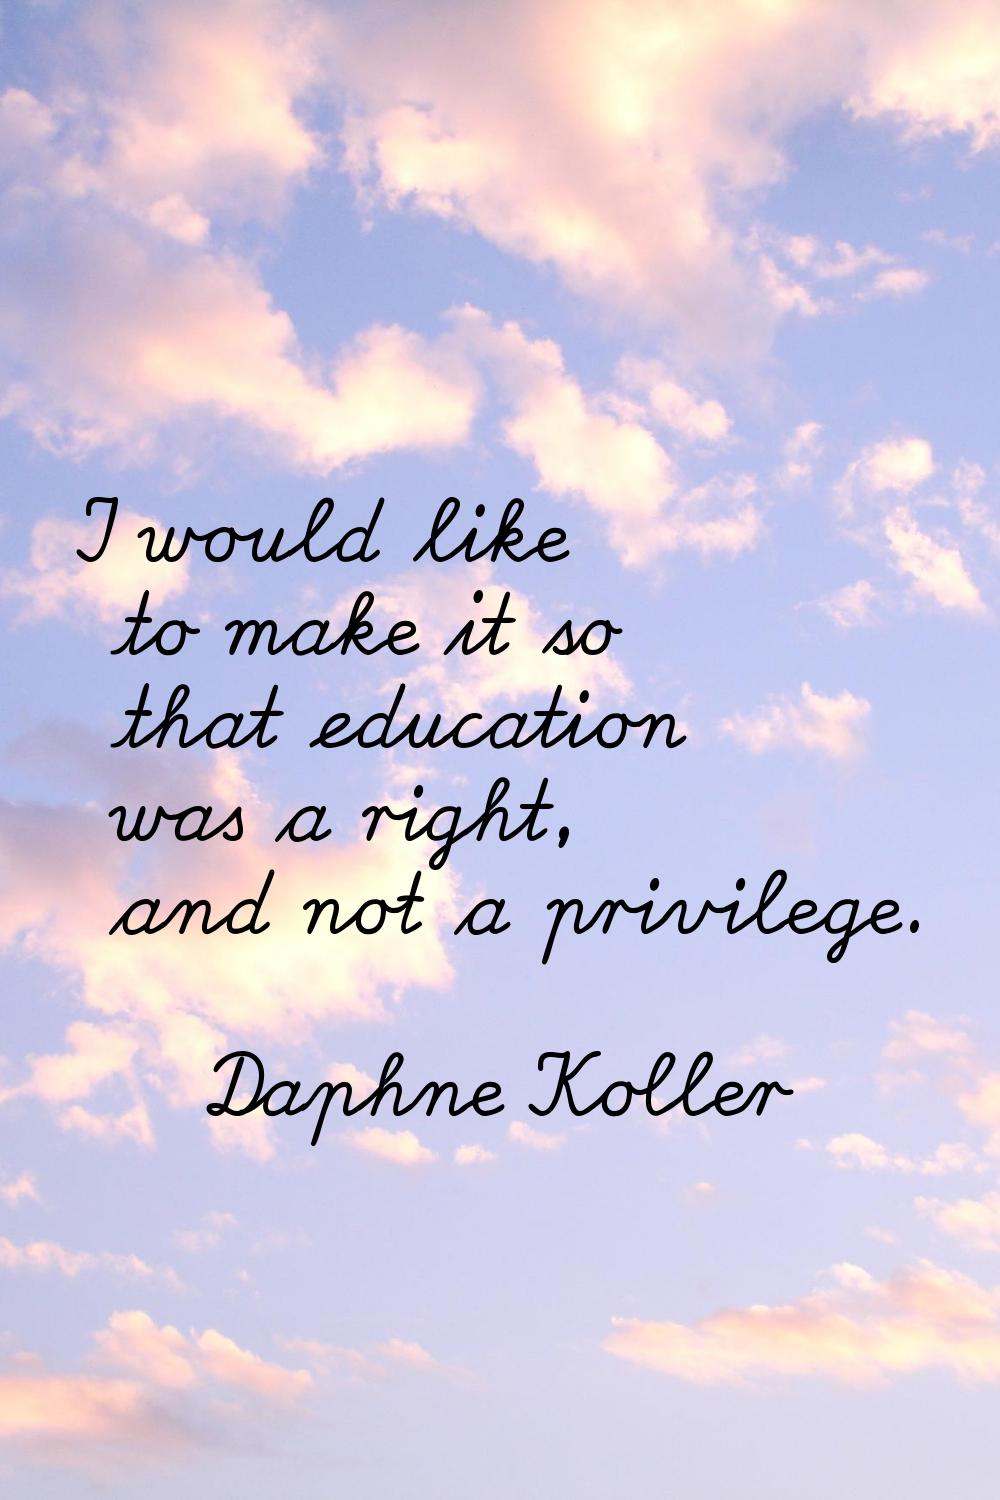 I would like to make it so that education was a right, and not a privilege.